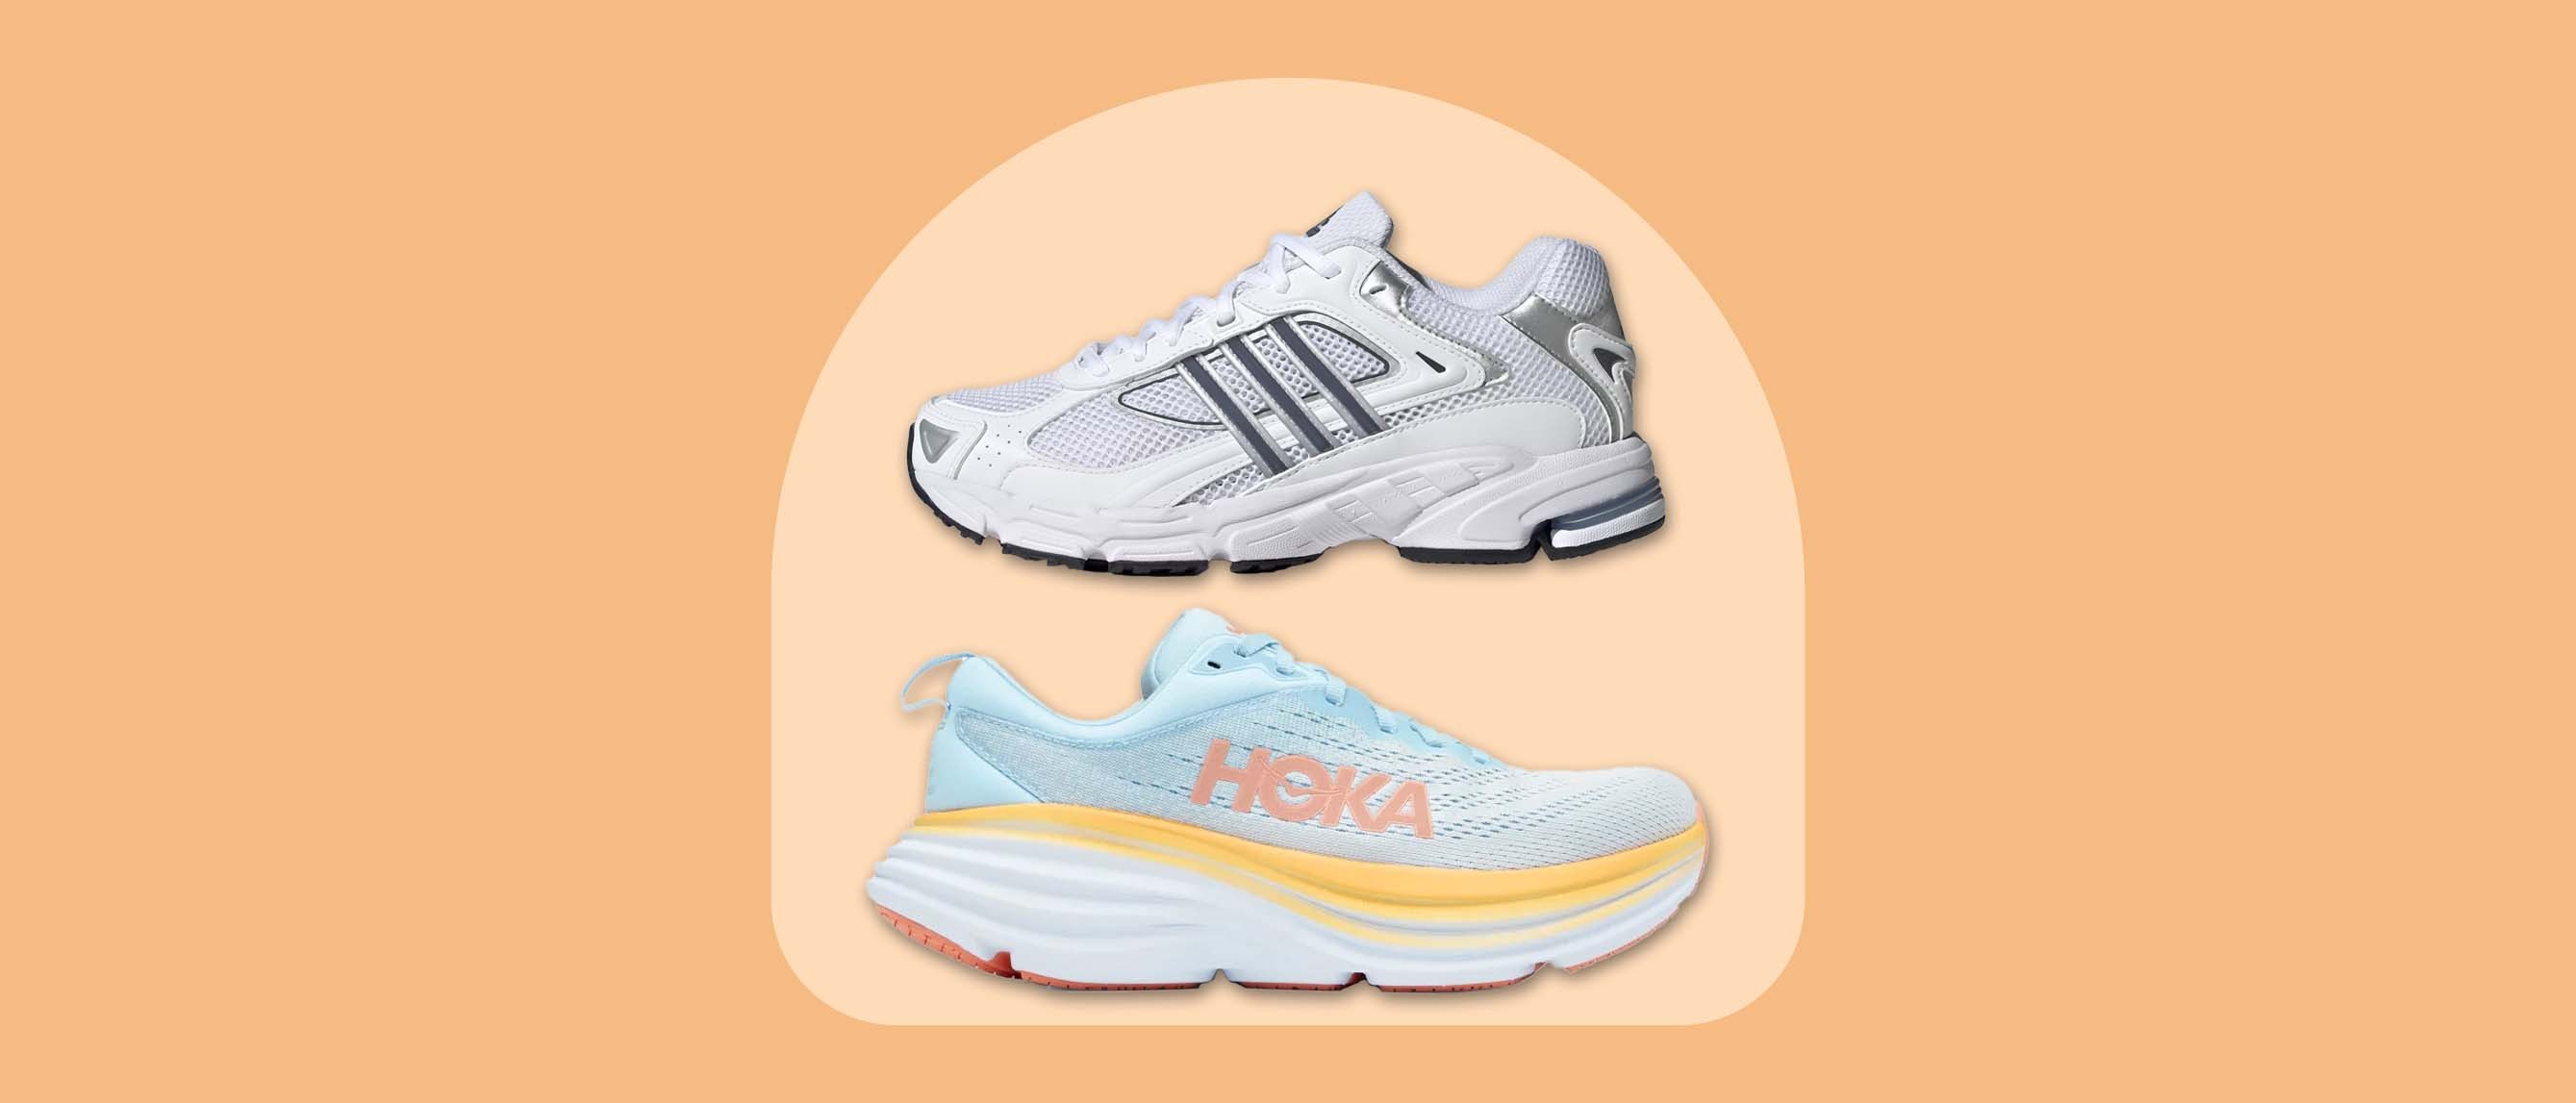 Step it up with the 8 best walking shoes for women